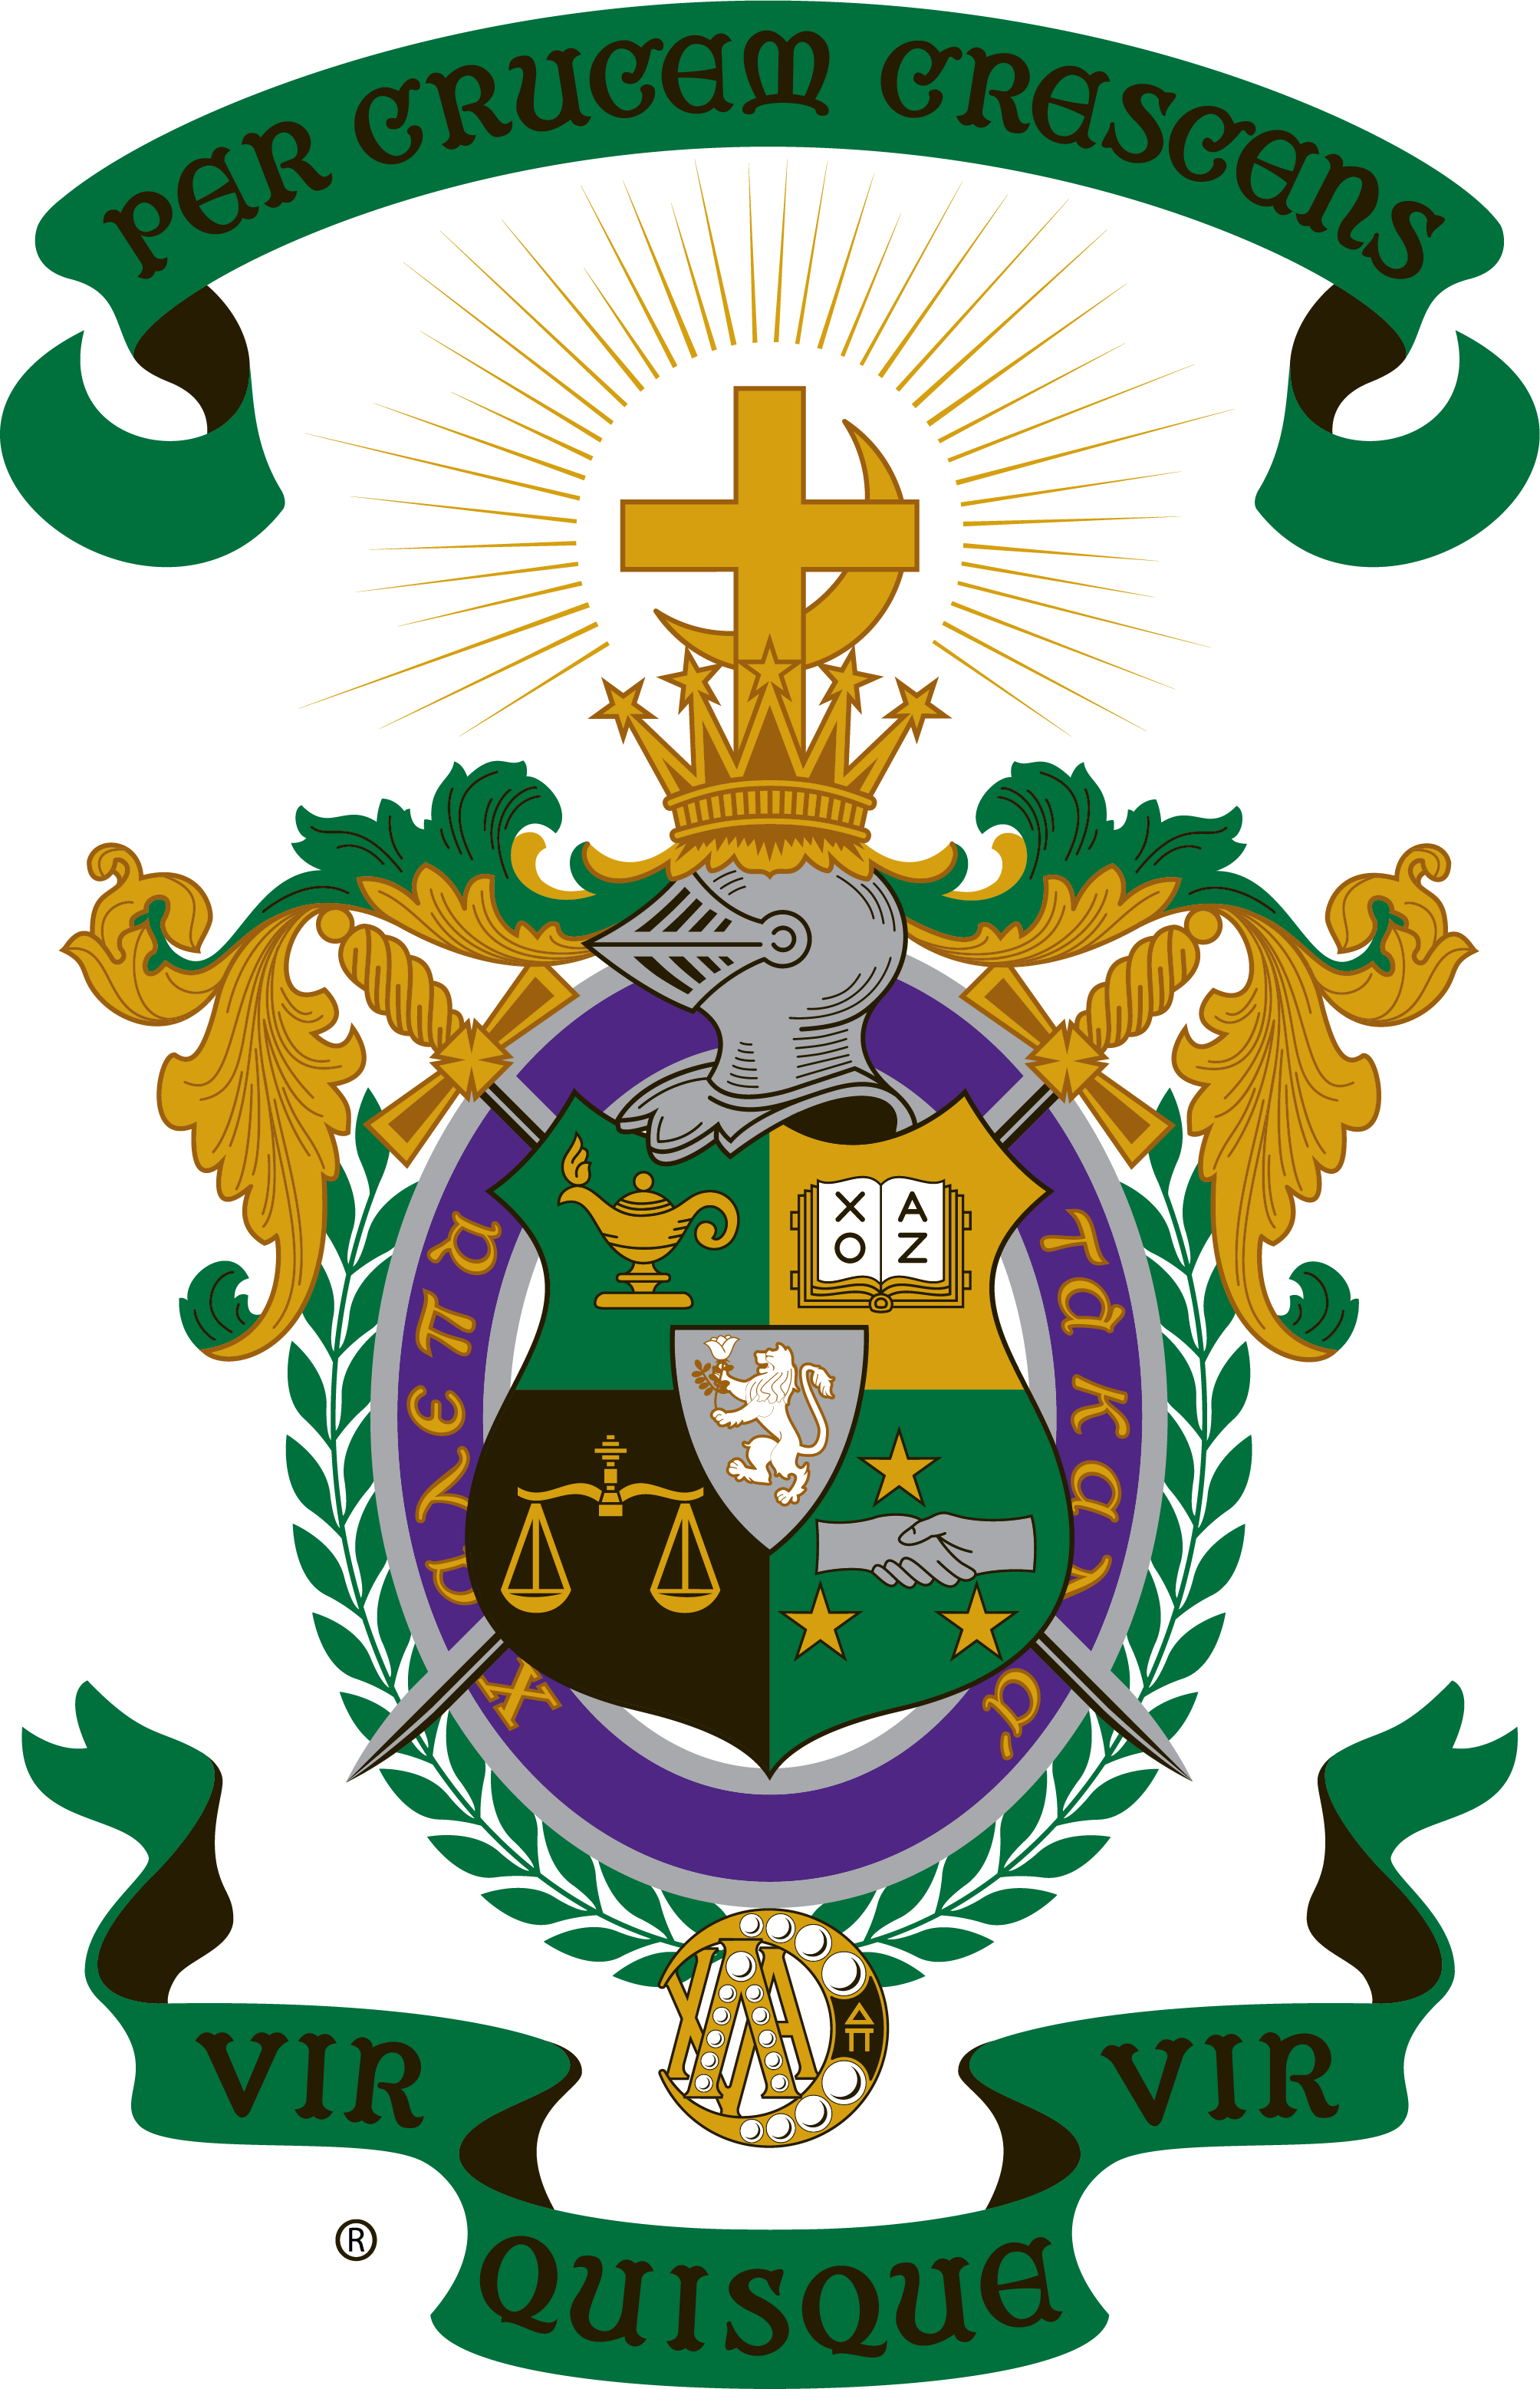 Lambda Chi Alpha crest showing colors of green, purple, gold